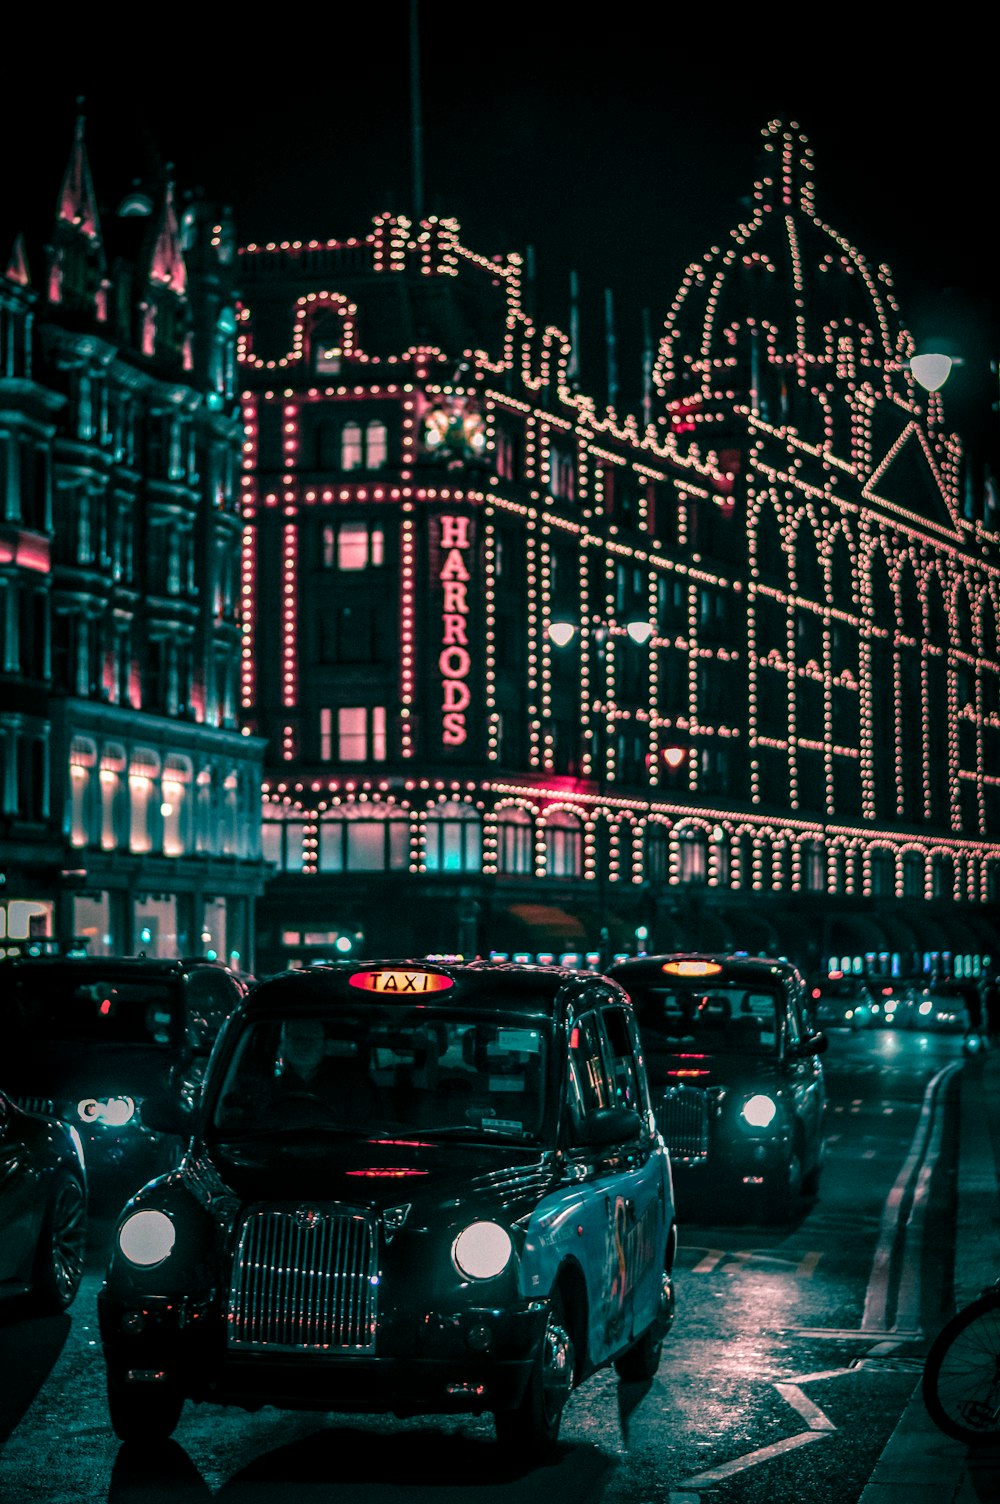 black taxi in the street passing trough Harrods Mall during nighttime